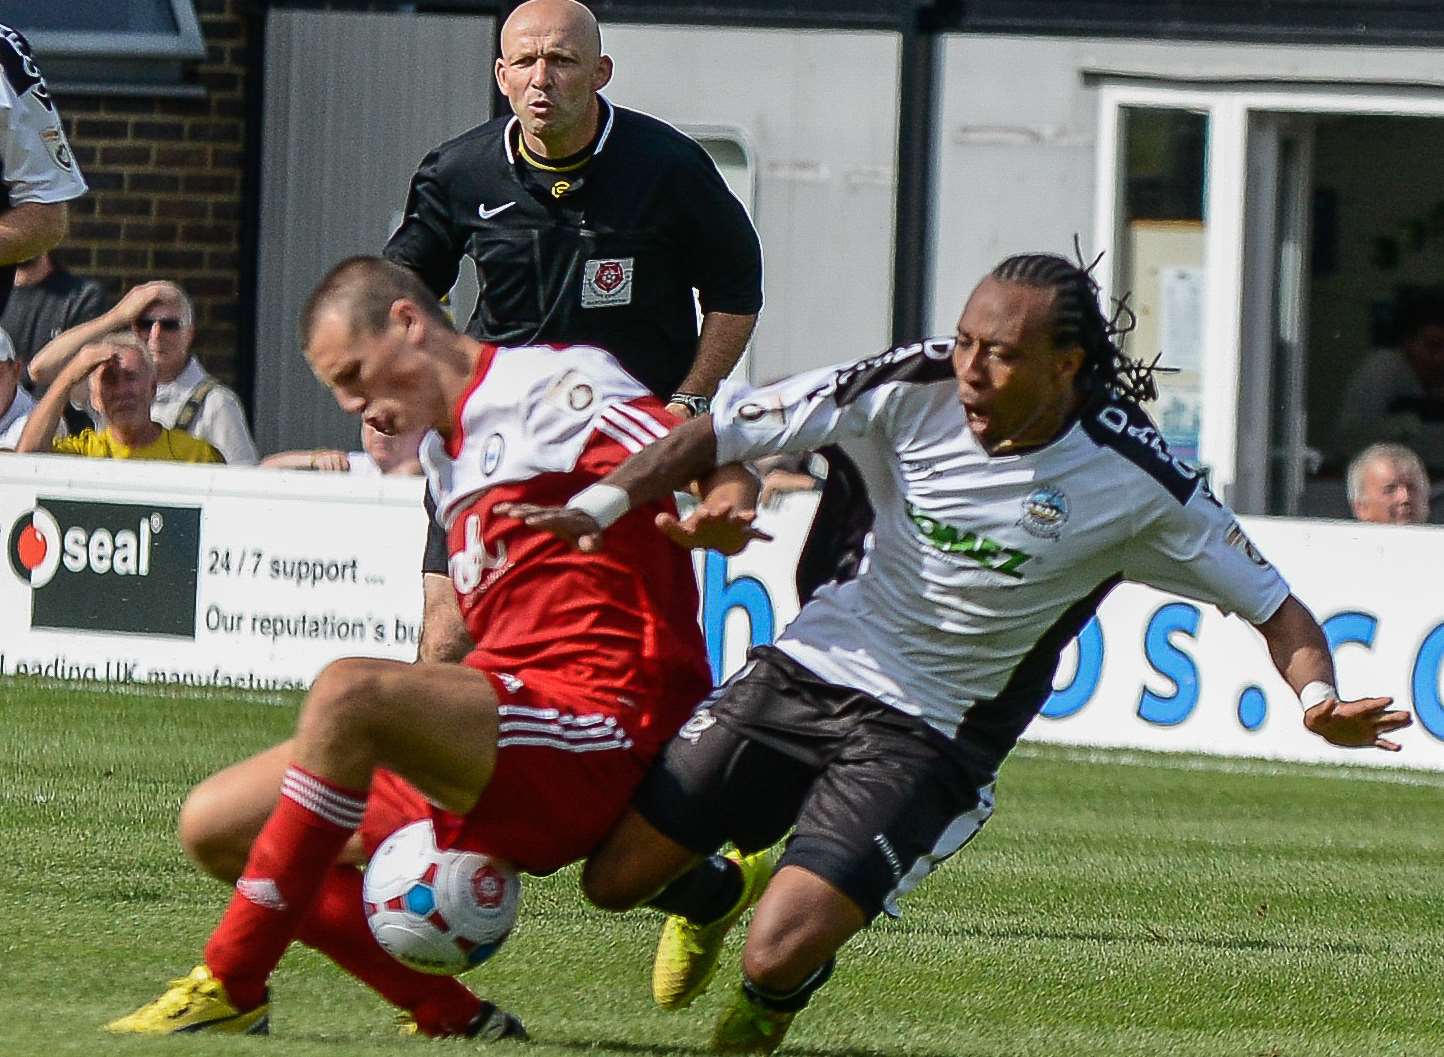 Dover's Ricky Modeste, right, in action against Halifax in the Vanarama Conference clash at Crabble